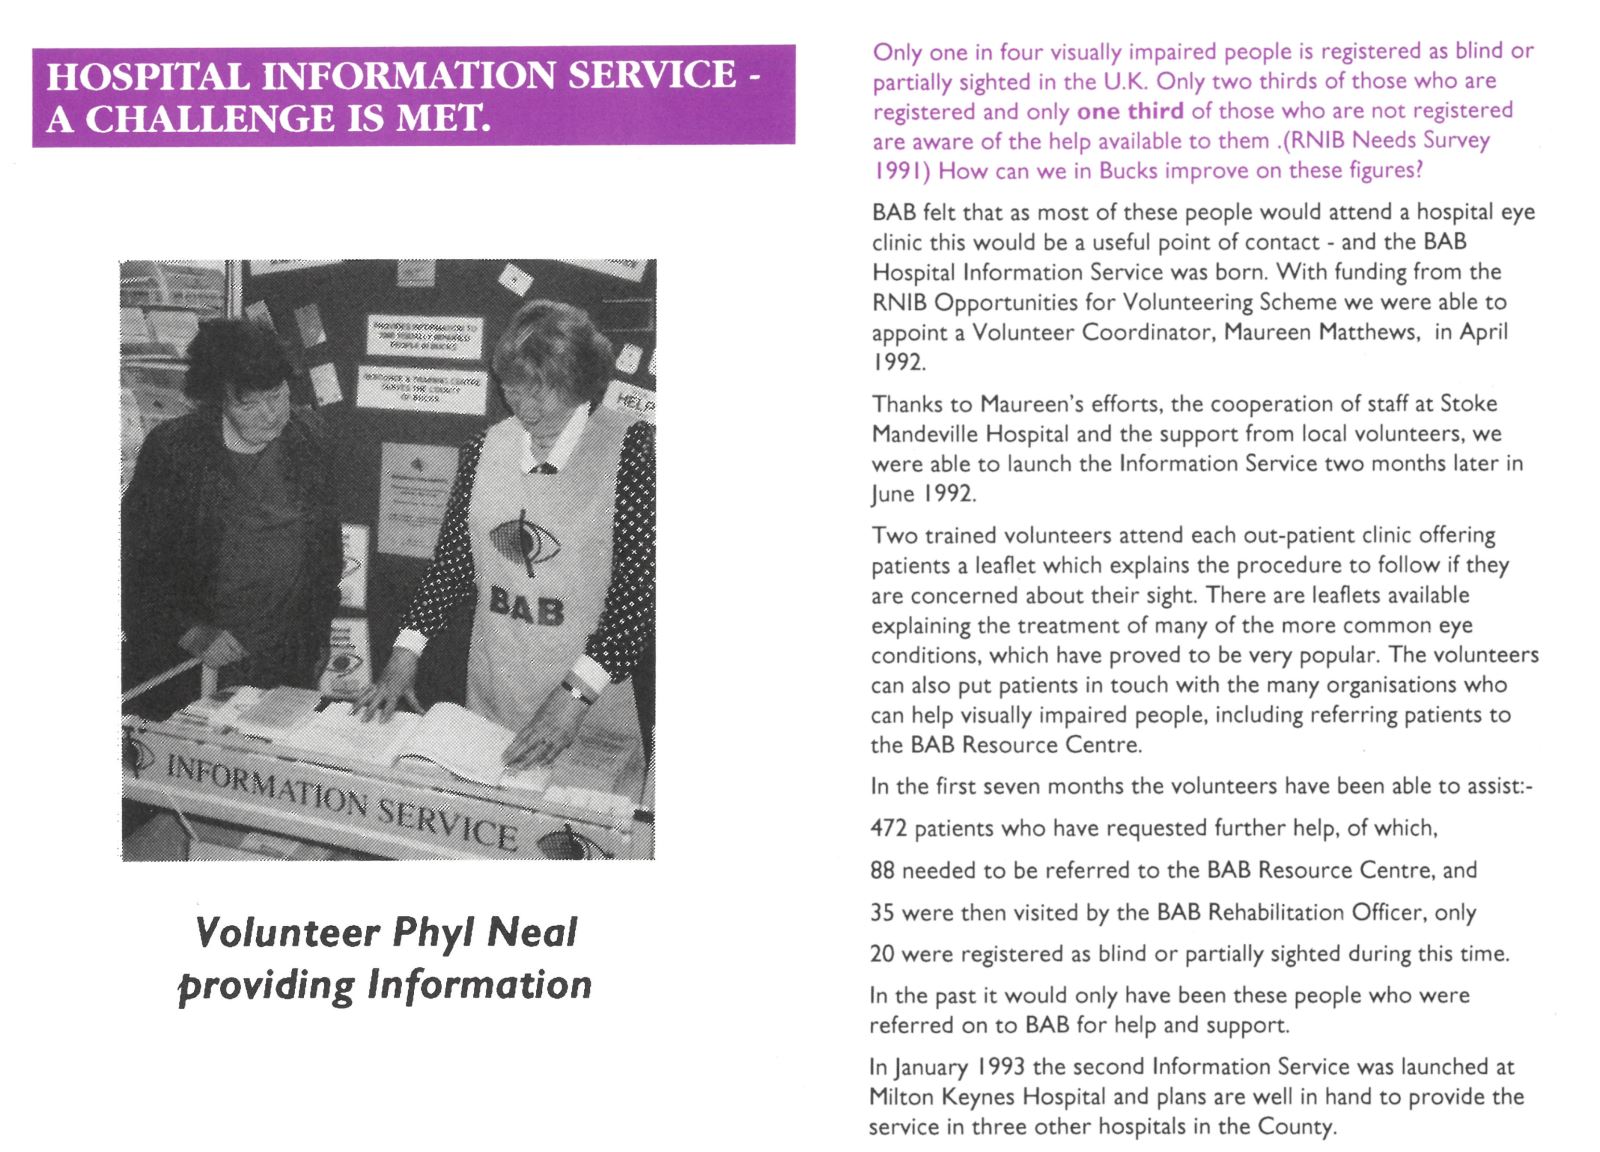 1992 - Hospital Information Service launches